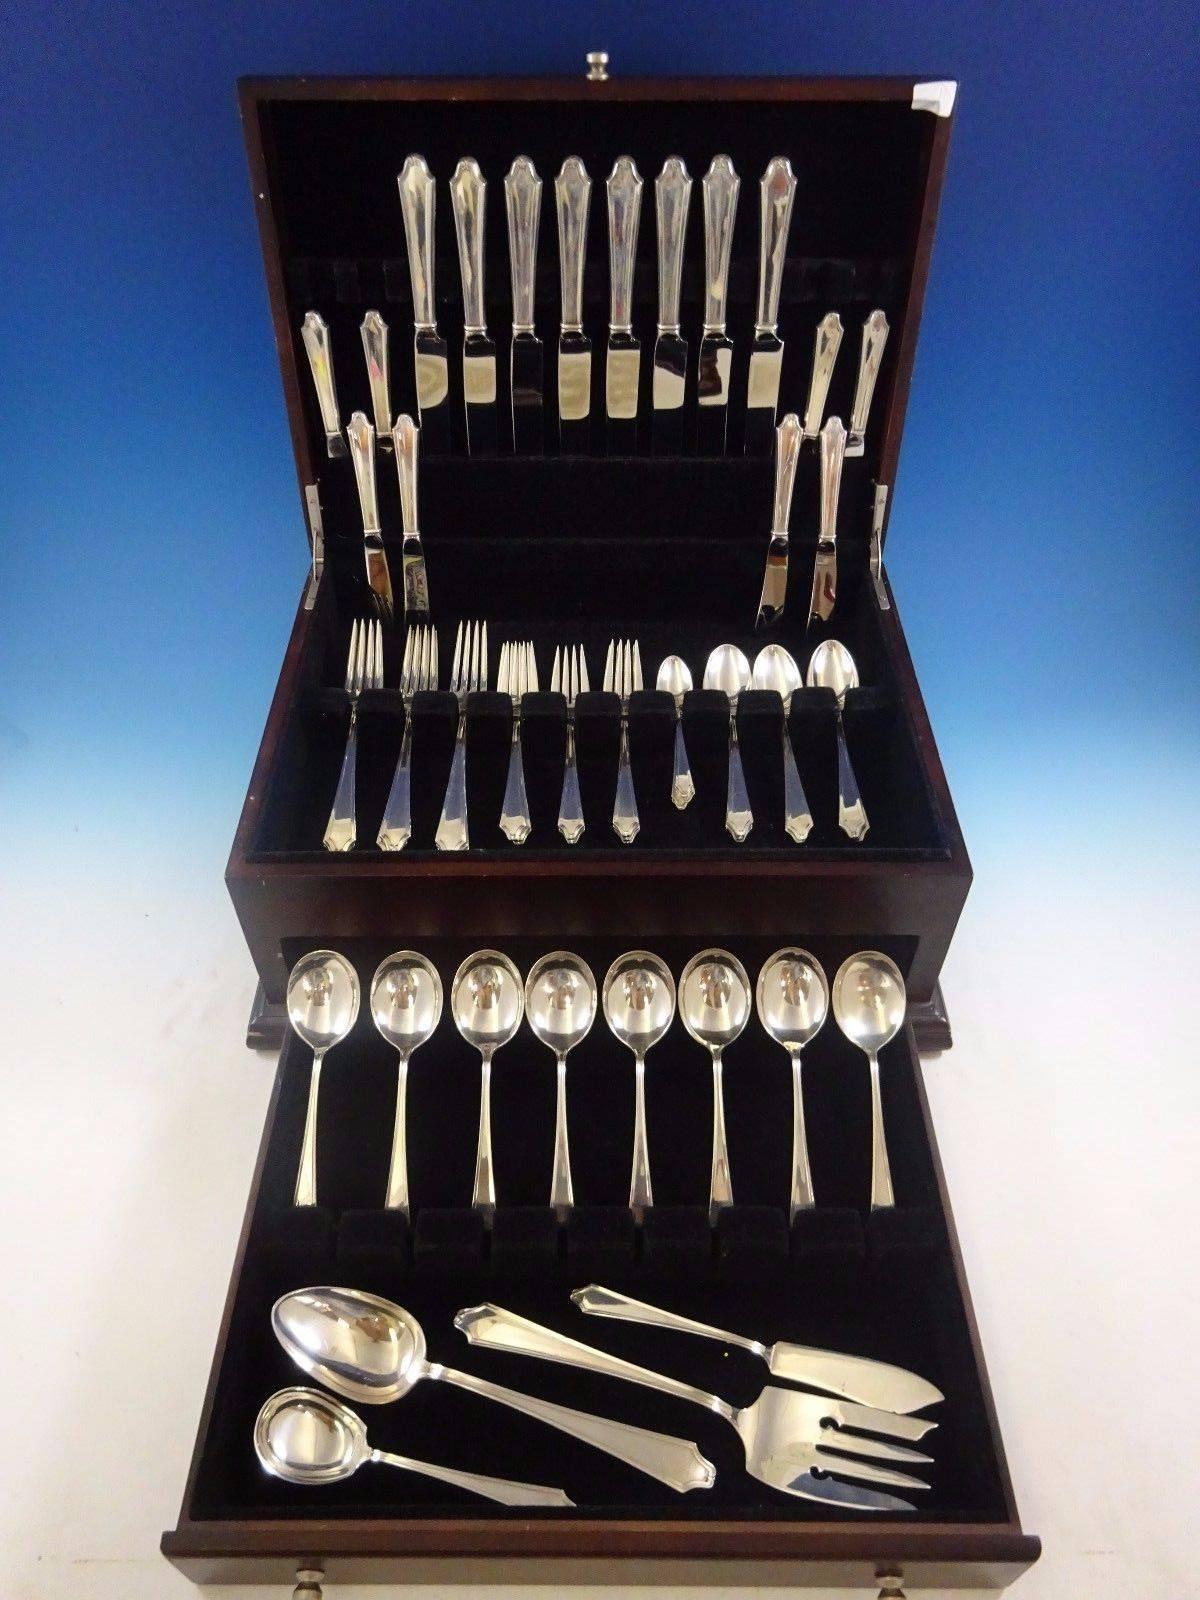 Lovely Minuet by International sterling silver flatware set of 60 pieces. This set includes:

Eight knives, 9